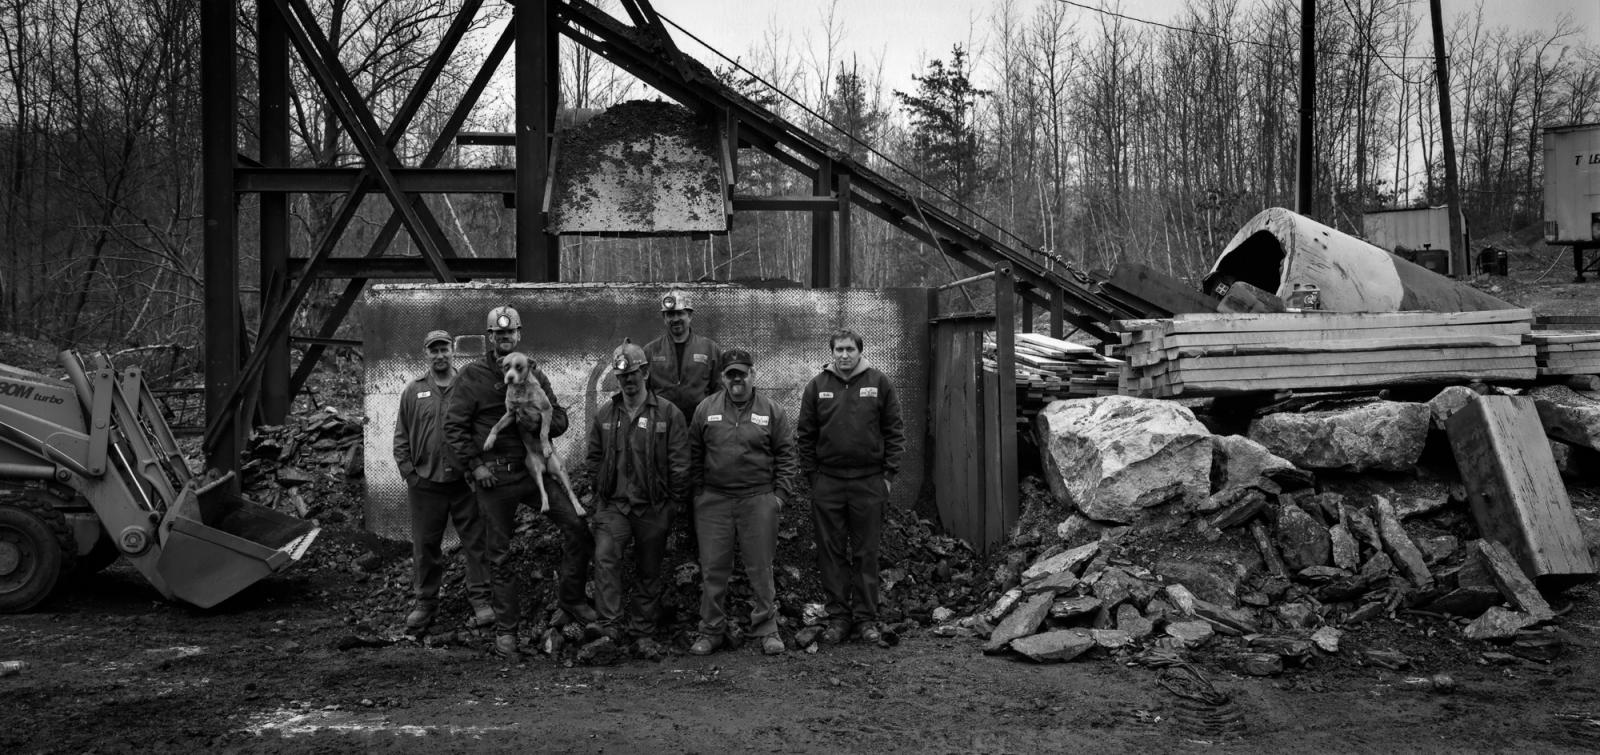 Image from The Portraits -   Little Buck Mine crew with dog  